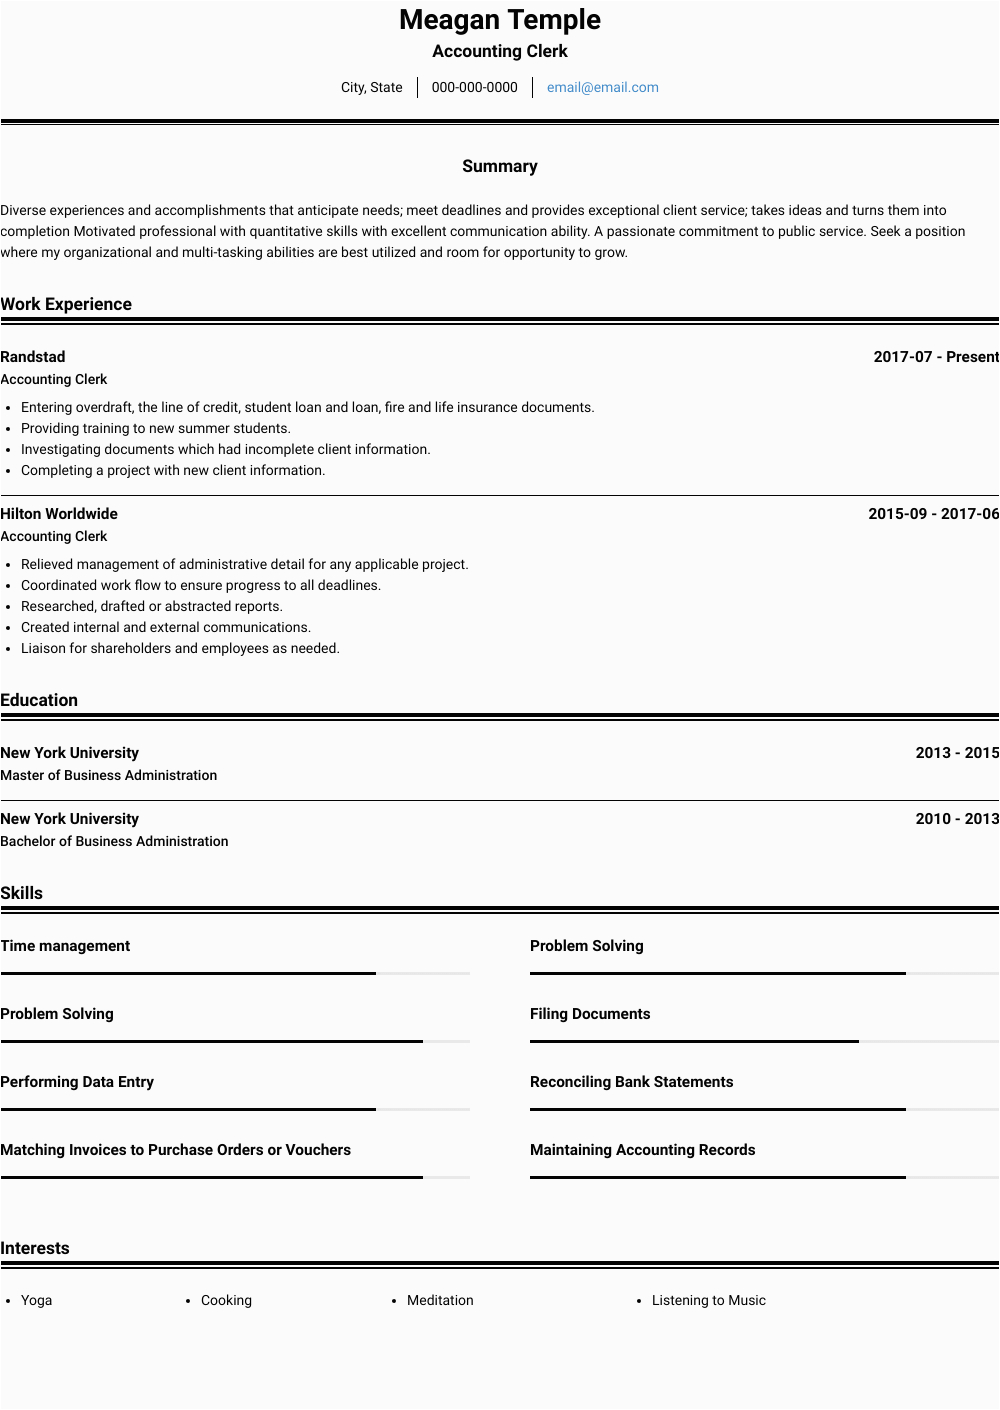 Free Sample Resume for Accounting Clerk Accounting Clerk Resume Samples and Templates